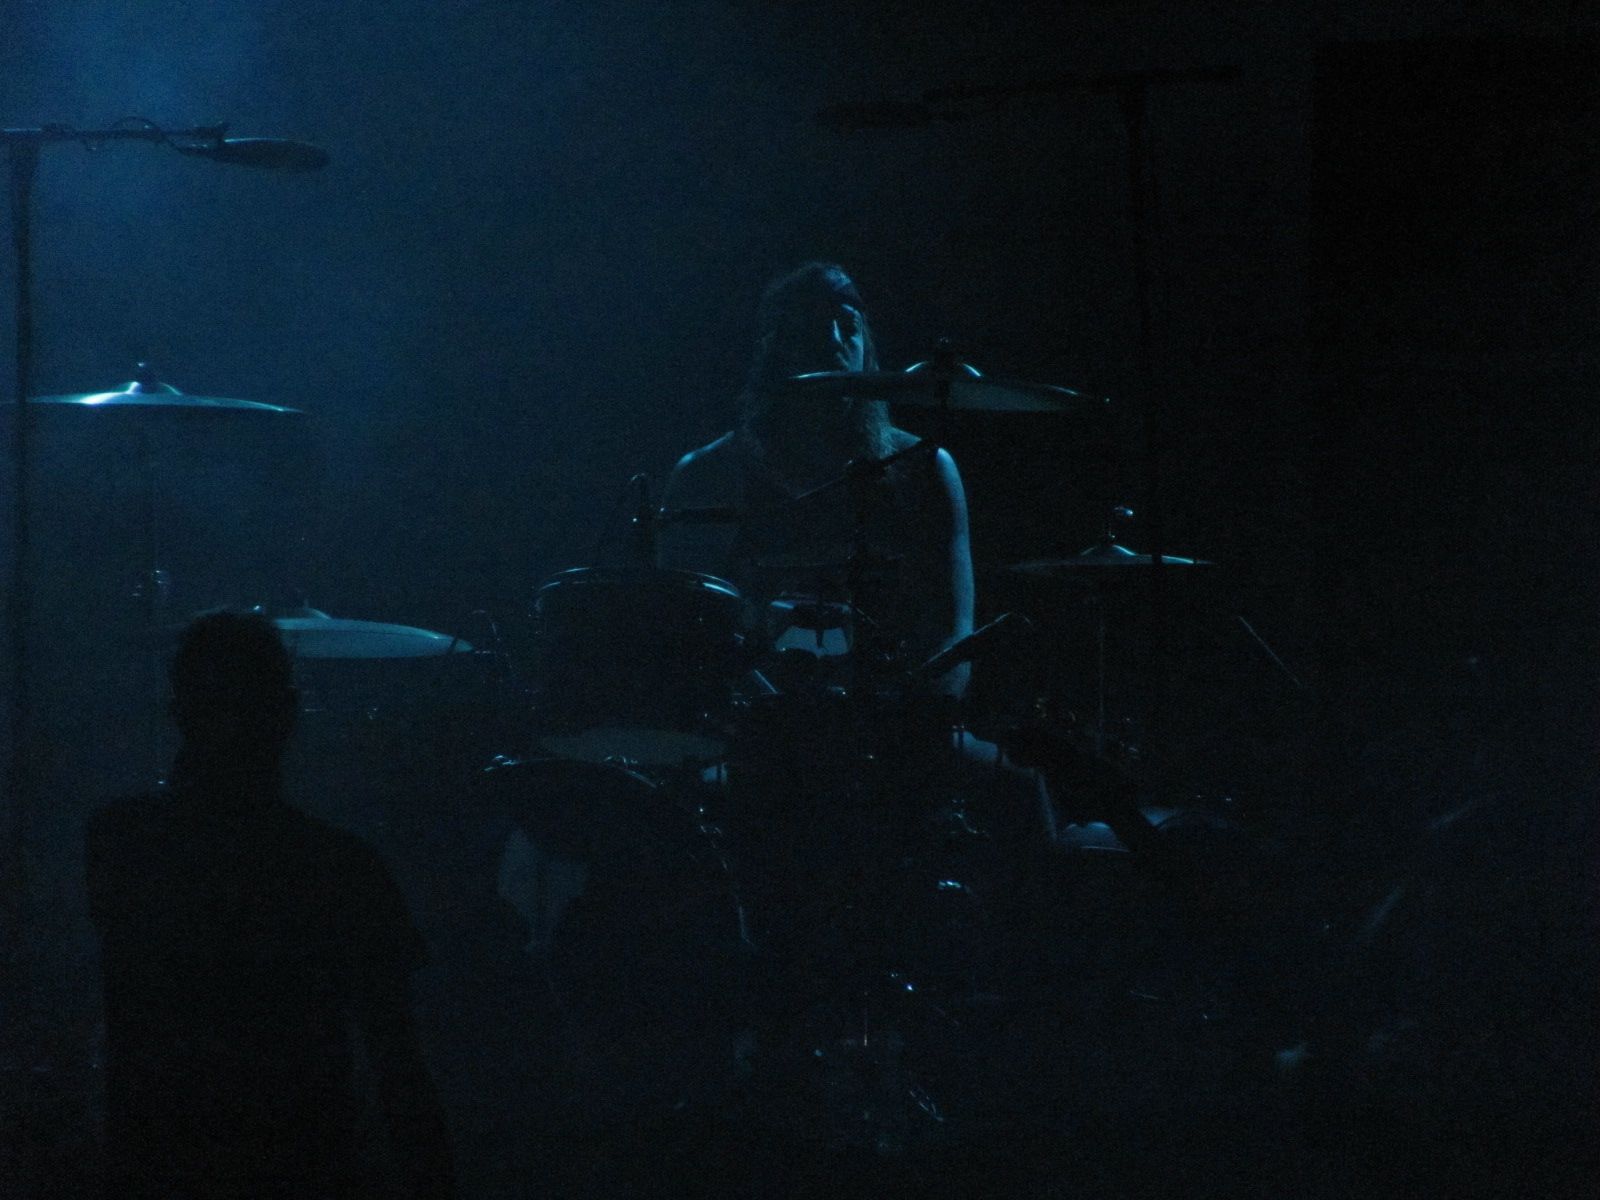 two men on stage in the dark playing instruments